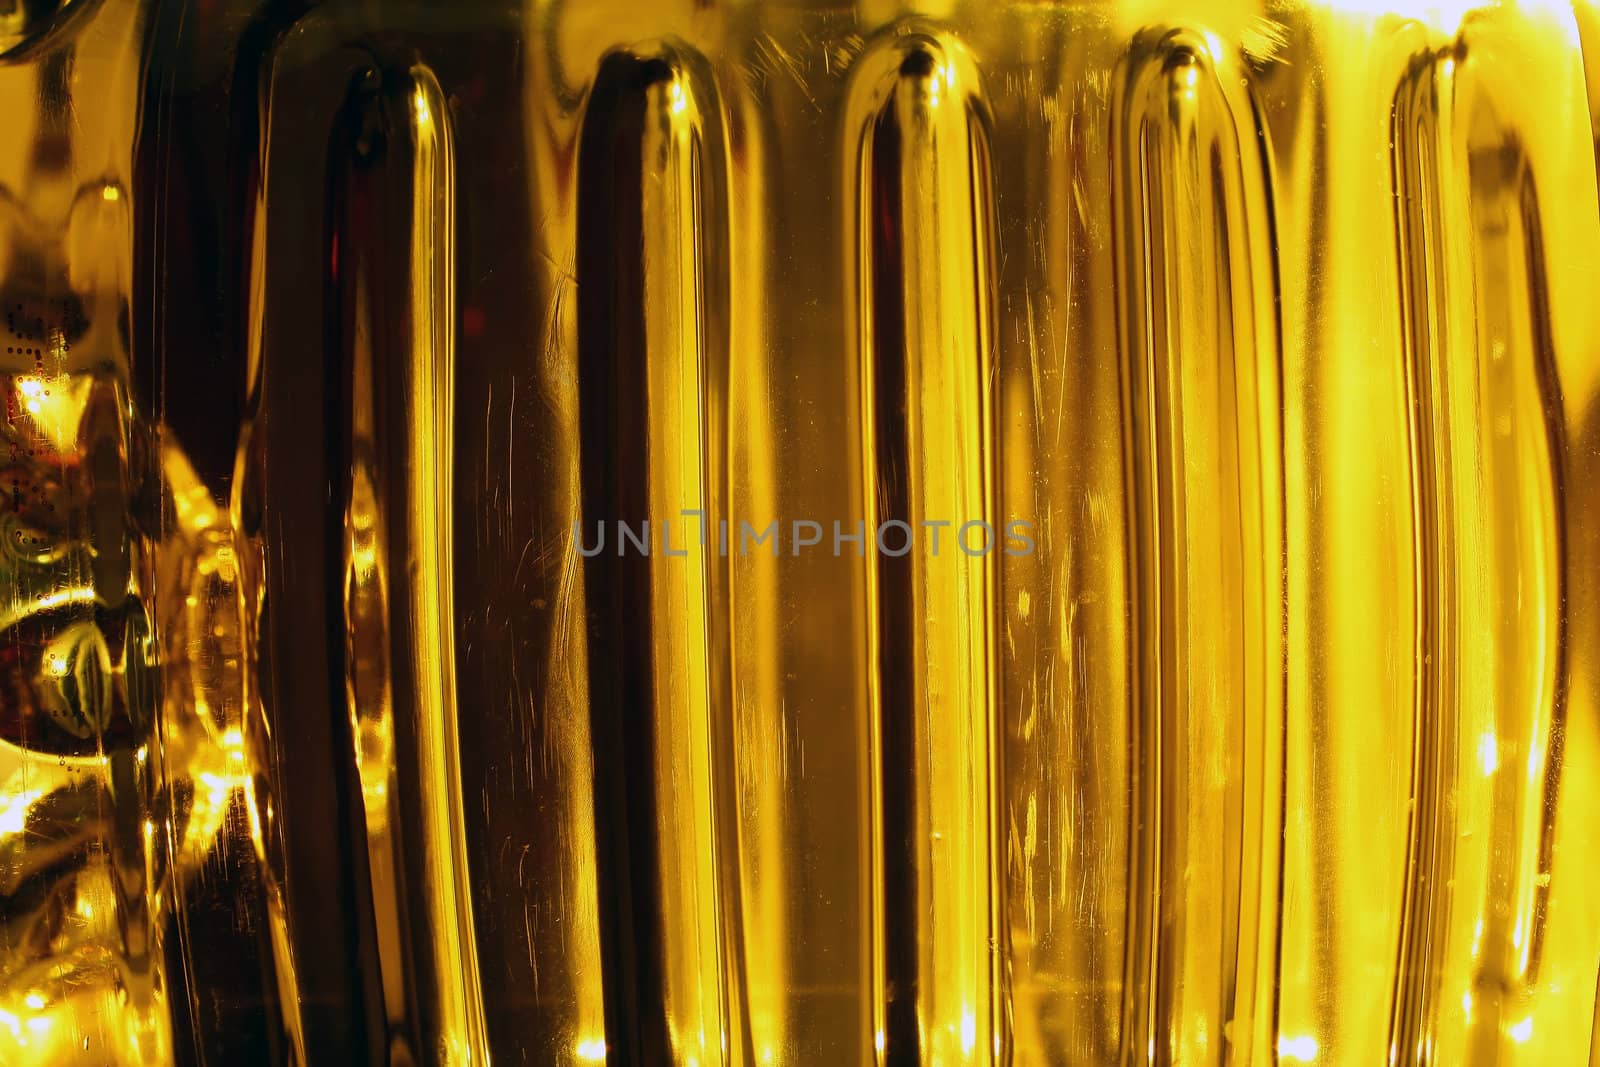 an extreme close up of a bottle of apple juice